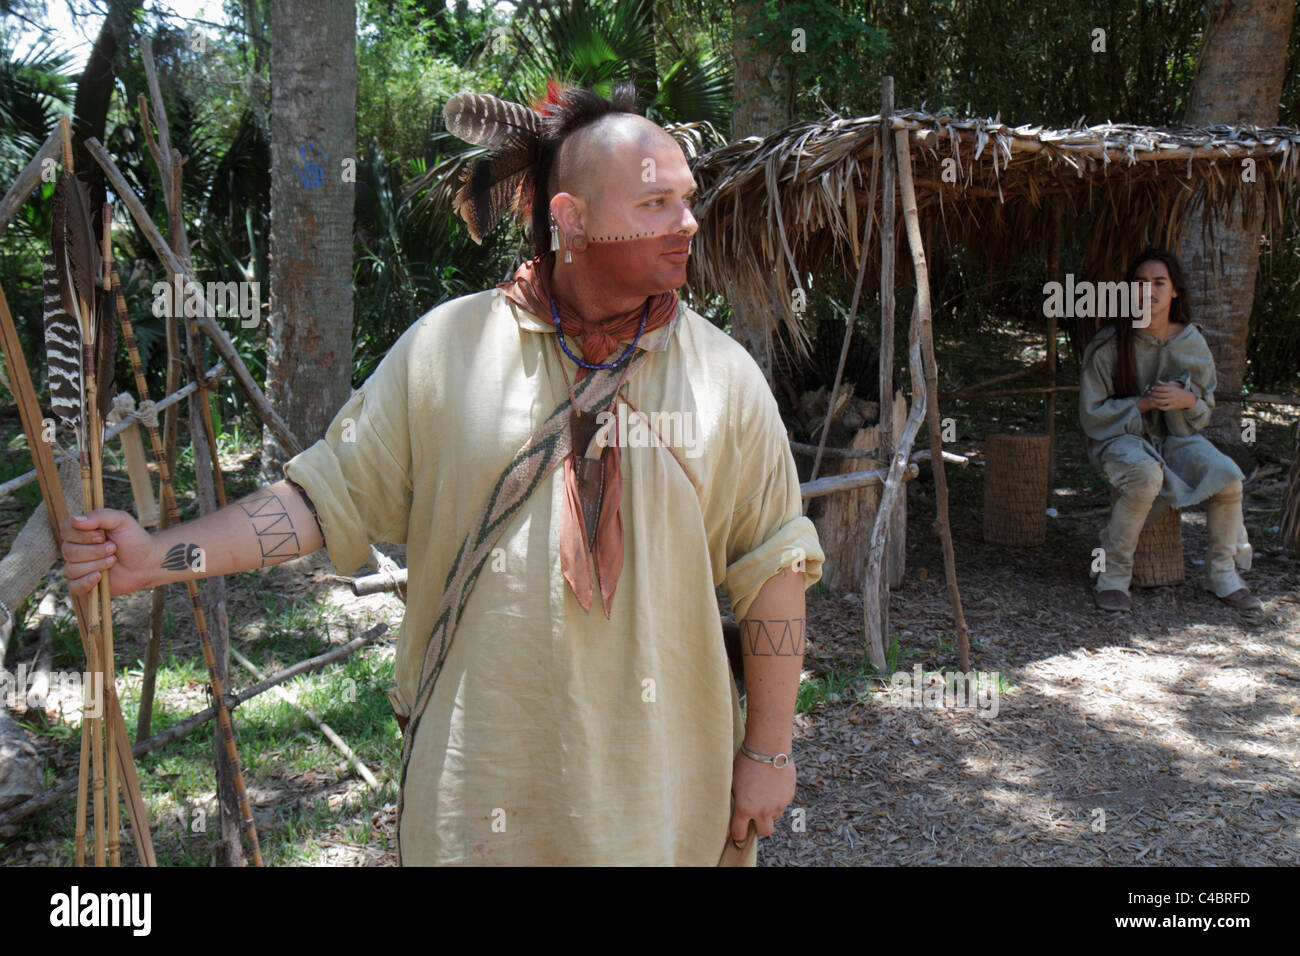 St. Saint Augustine Florida,Fountain of Youth Archaeological Park,Village of Seloy,Native American Indian,Indian indigenous peoples,regalia,costume,ex Stock Photo